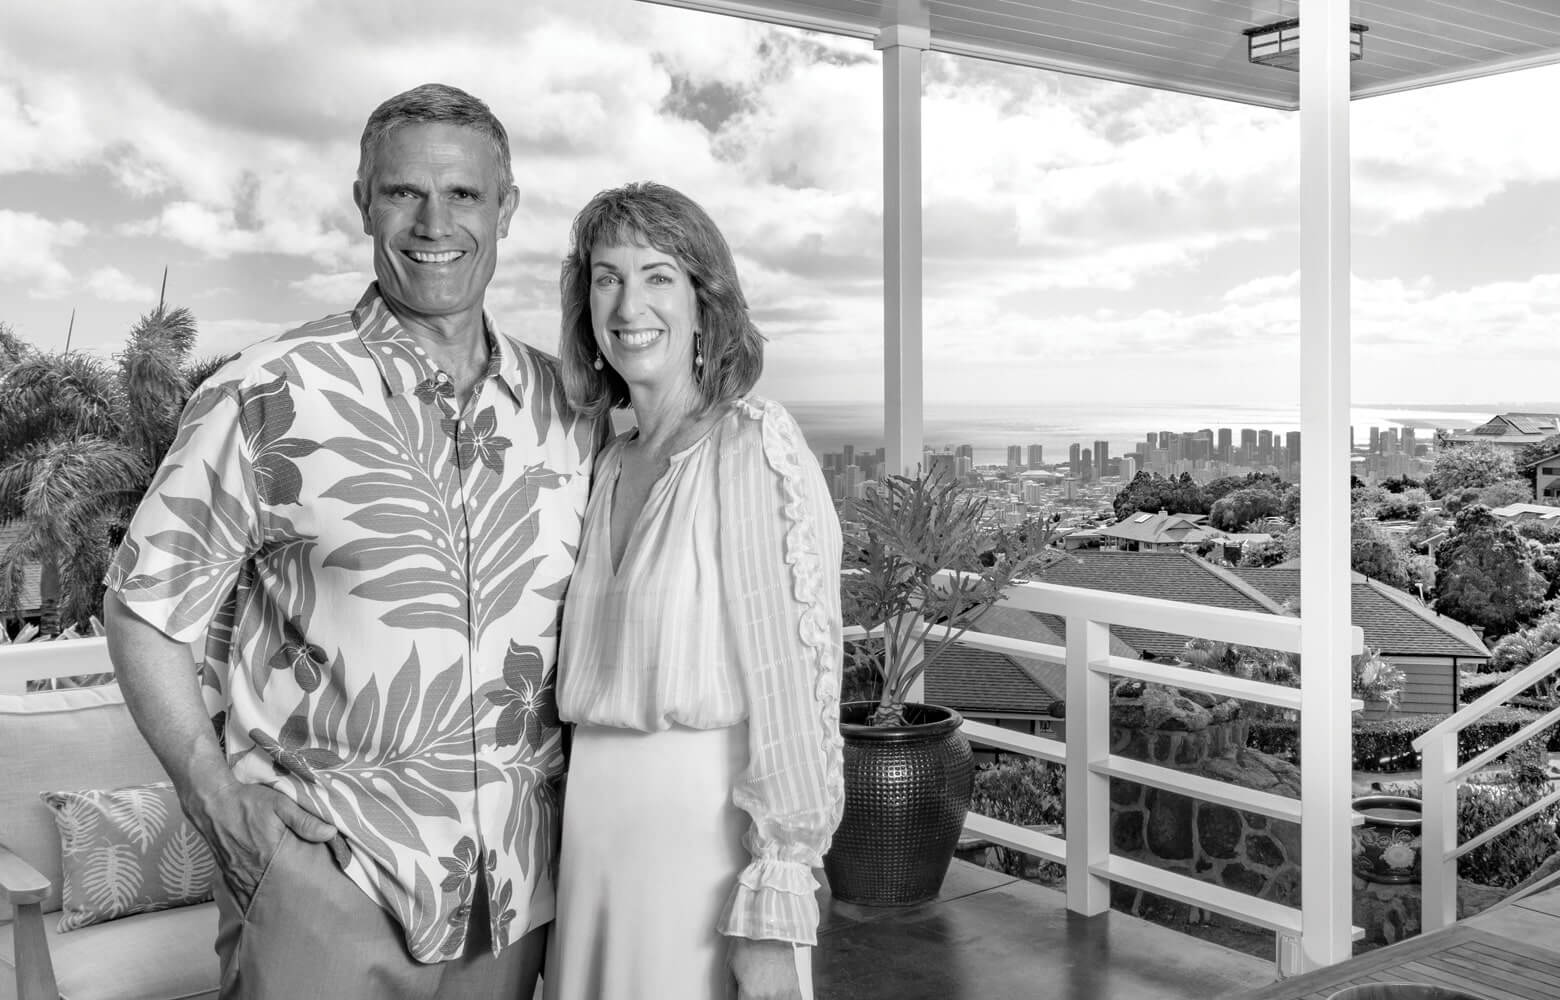 Owners of Nexthome Ku Realty pose on a spacious lanai with a beautiful skyline view in the background.